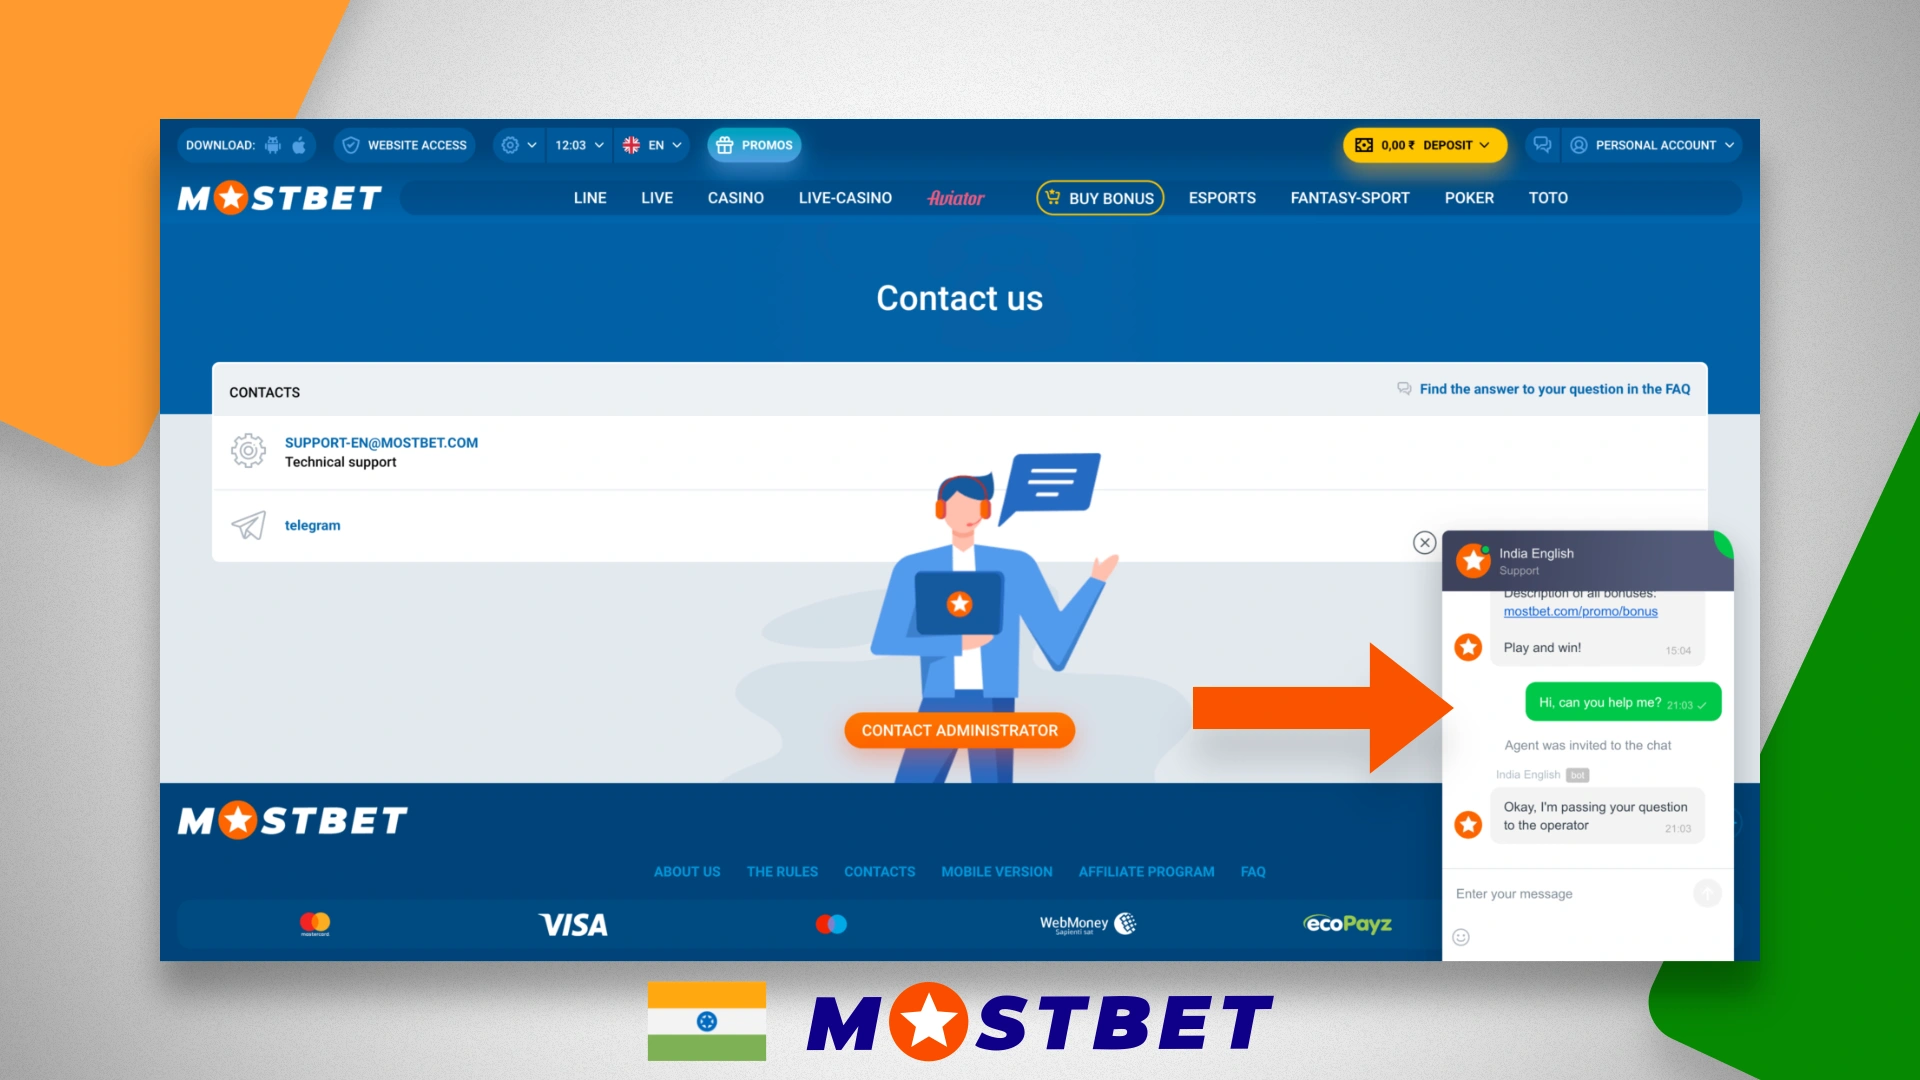 Online chat with Mostbet customer support in India